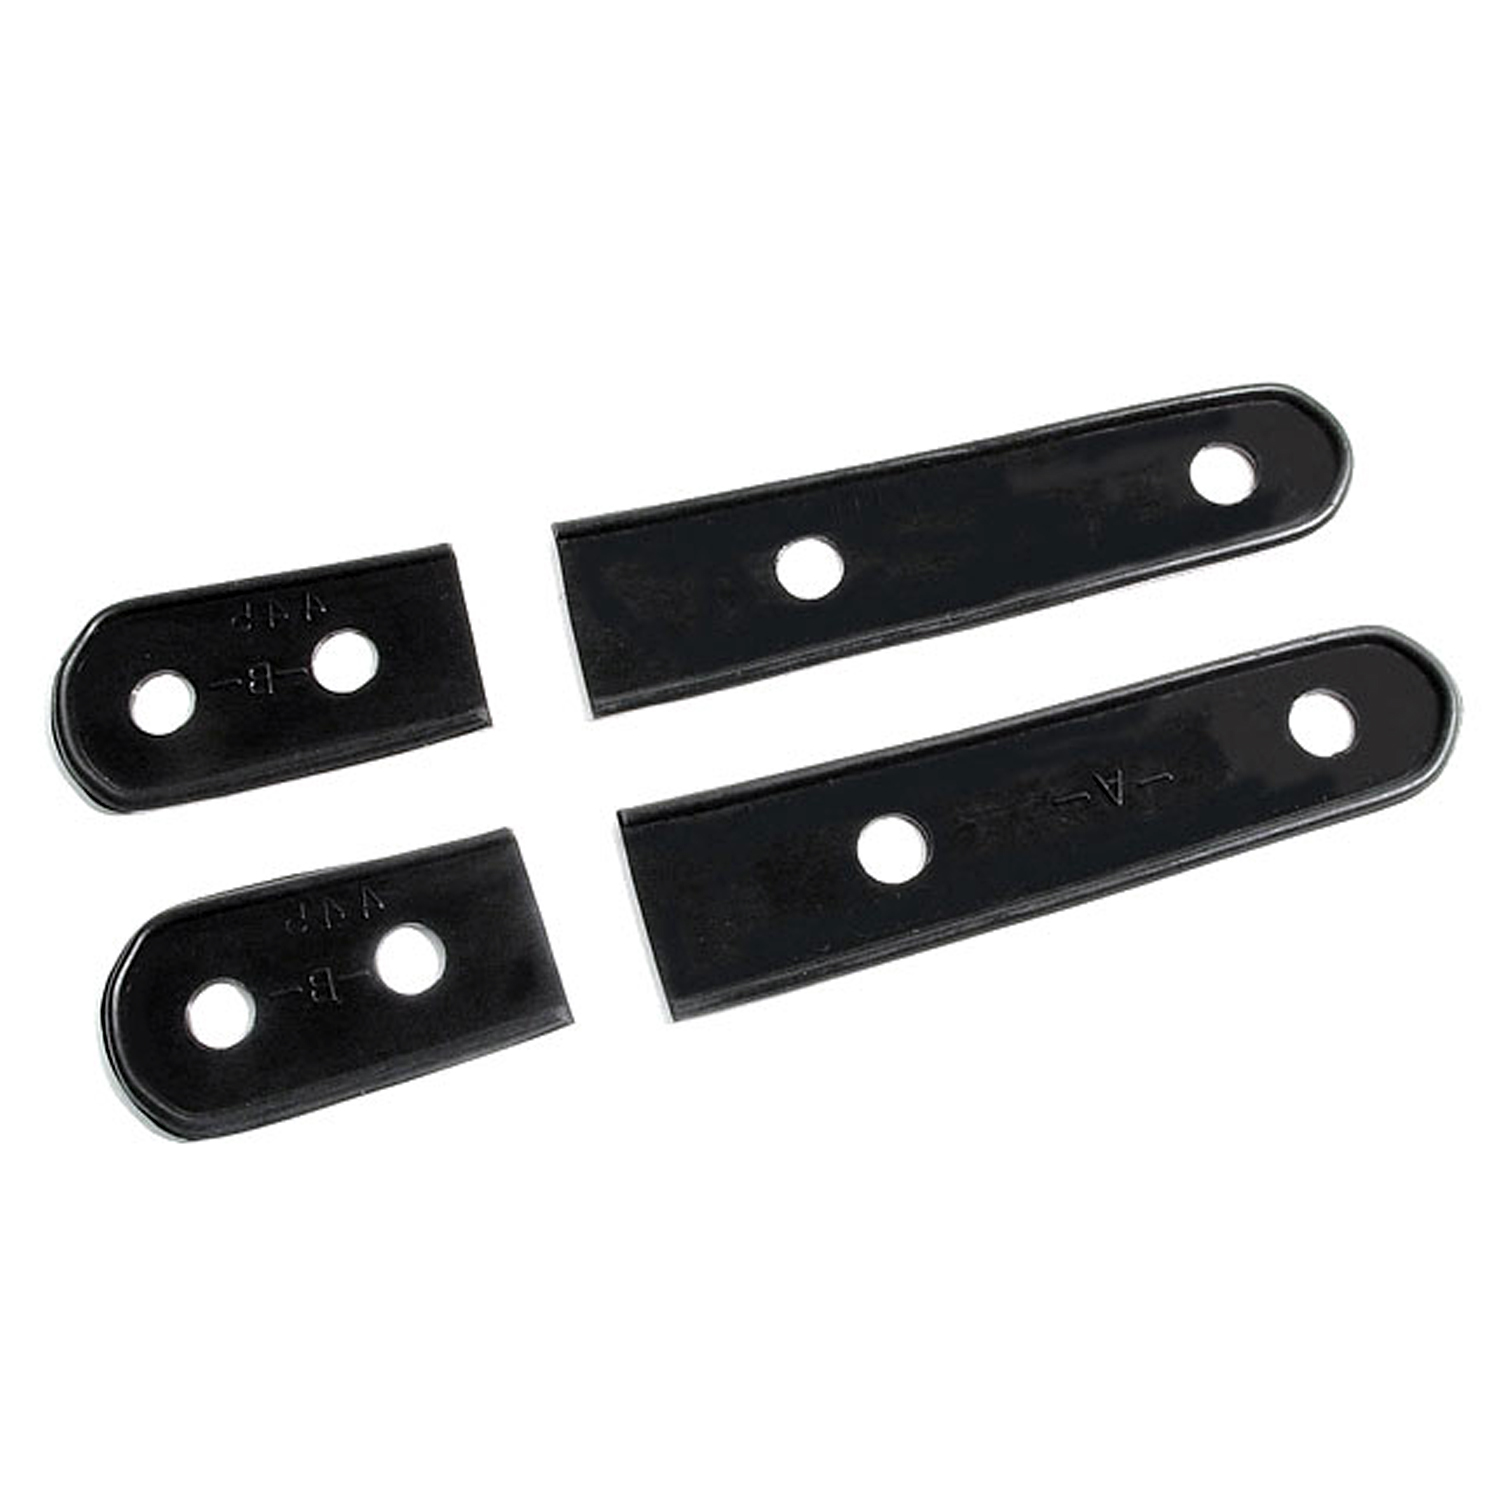 1940 Cadillac Series 72 Trunk Hinge Pads.  1-3/8 wide X 8 long.  4-Piece Set-MP 445